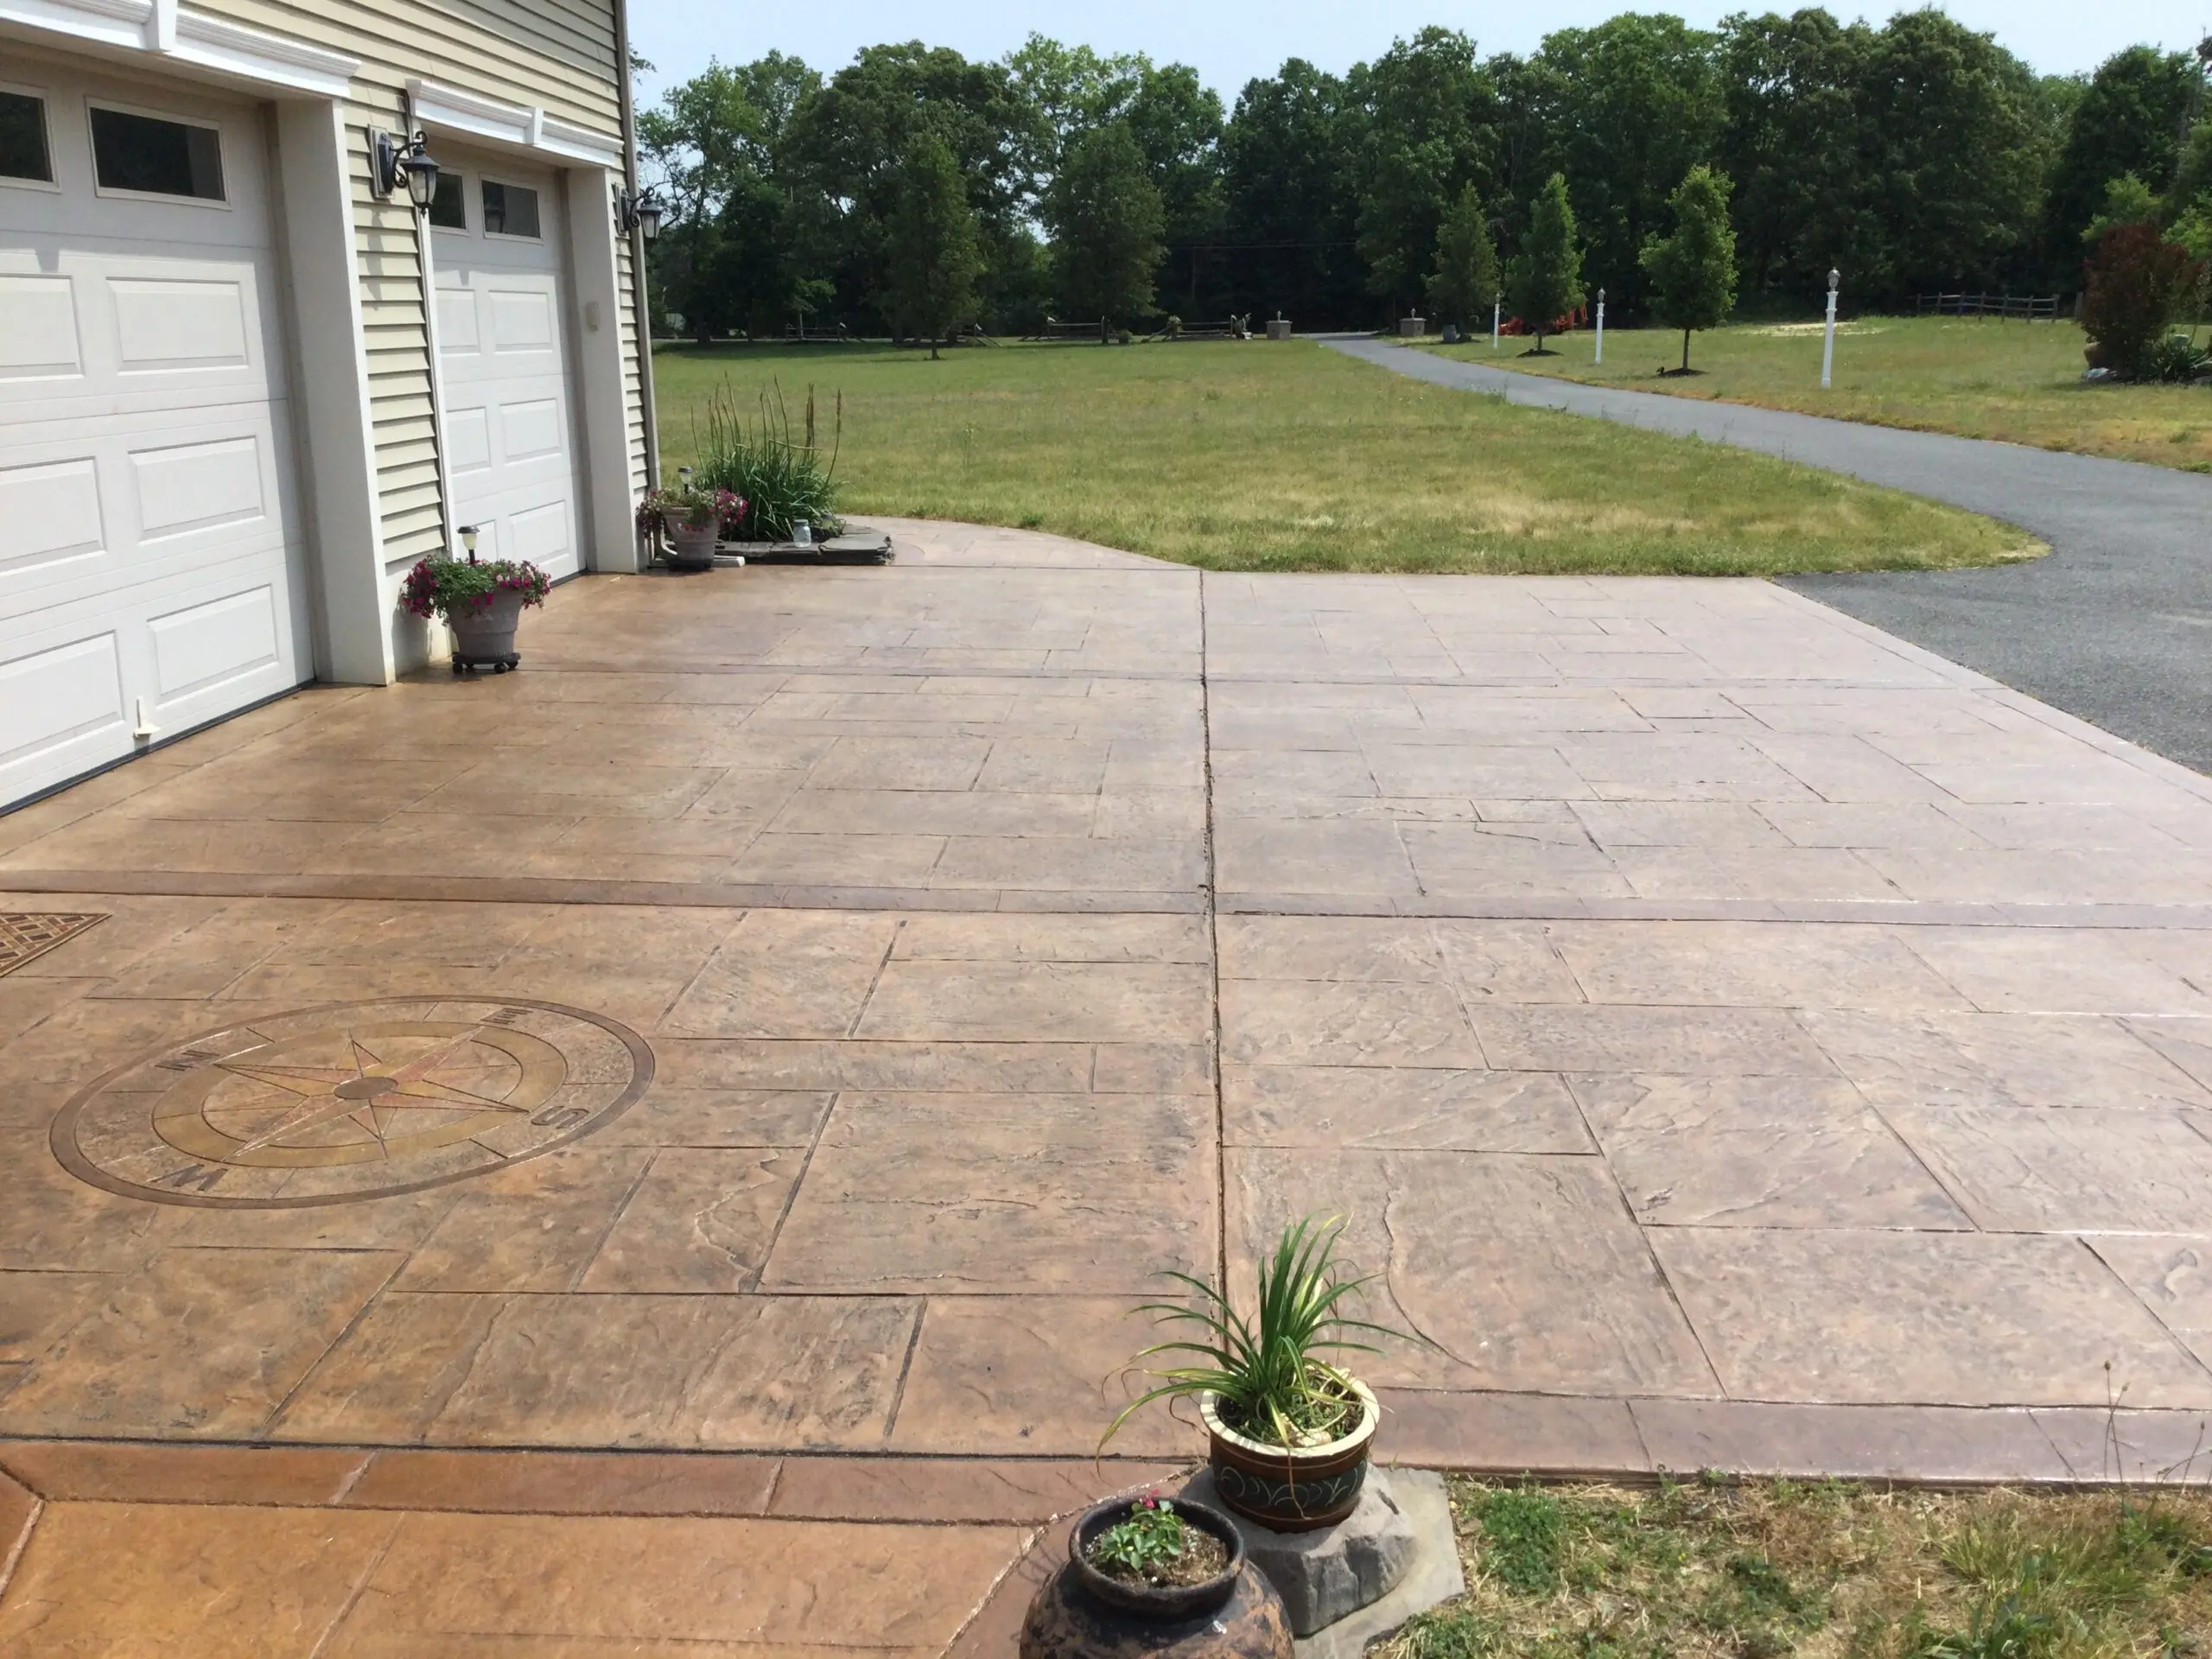 The refreshed driveway post application of Driftwood and Cafe Royale stain, showing a vibrant, renewed surface